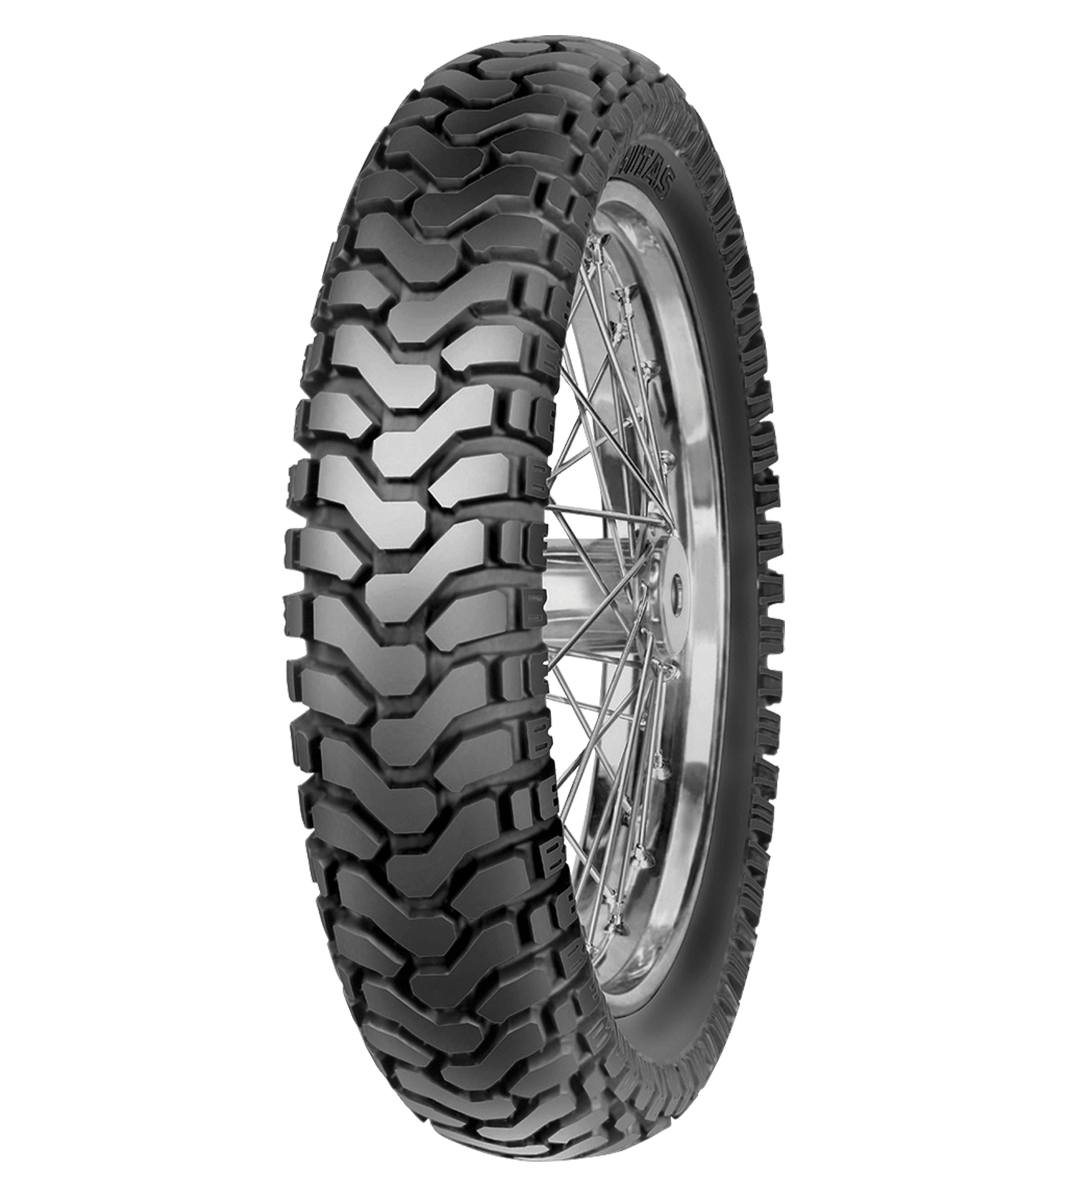 Mitas E-07 ENDURO 150/70-18 Trail OFF Trail 70T No Stripe Tubeless Rear Tire, 224404, 150/70-18, Adventure Touring, E Series, E-07 Enduro, Rear, Trail, Trail OFF, Tires - Imported and distributed in North &amp; South America by Lindeco Genuine Powersports - Premier Powersports Equipment and Accessories for Motorcycle Enthusiasts, Professional Riders and Dealers.